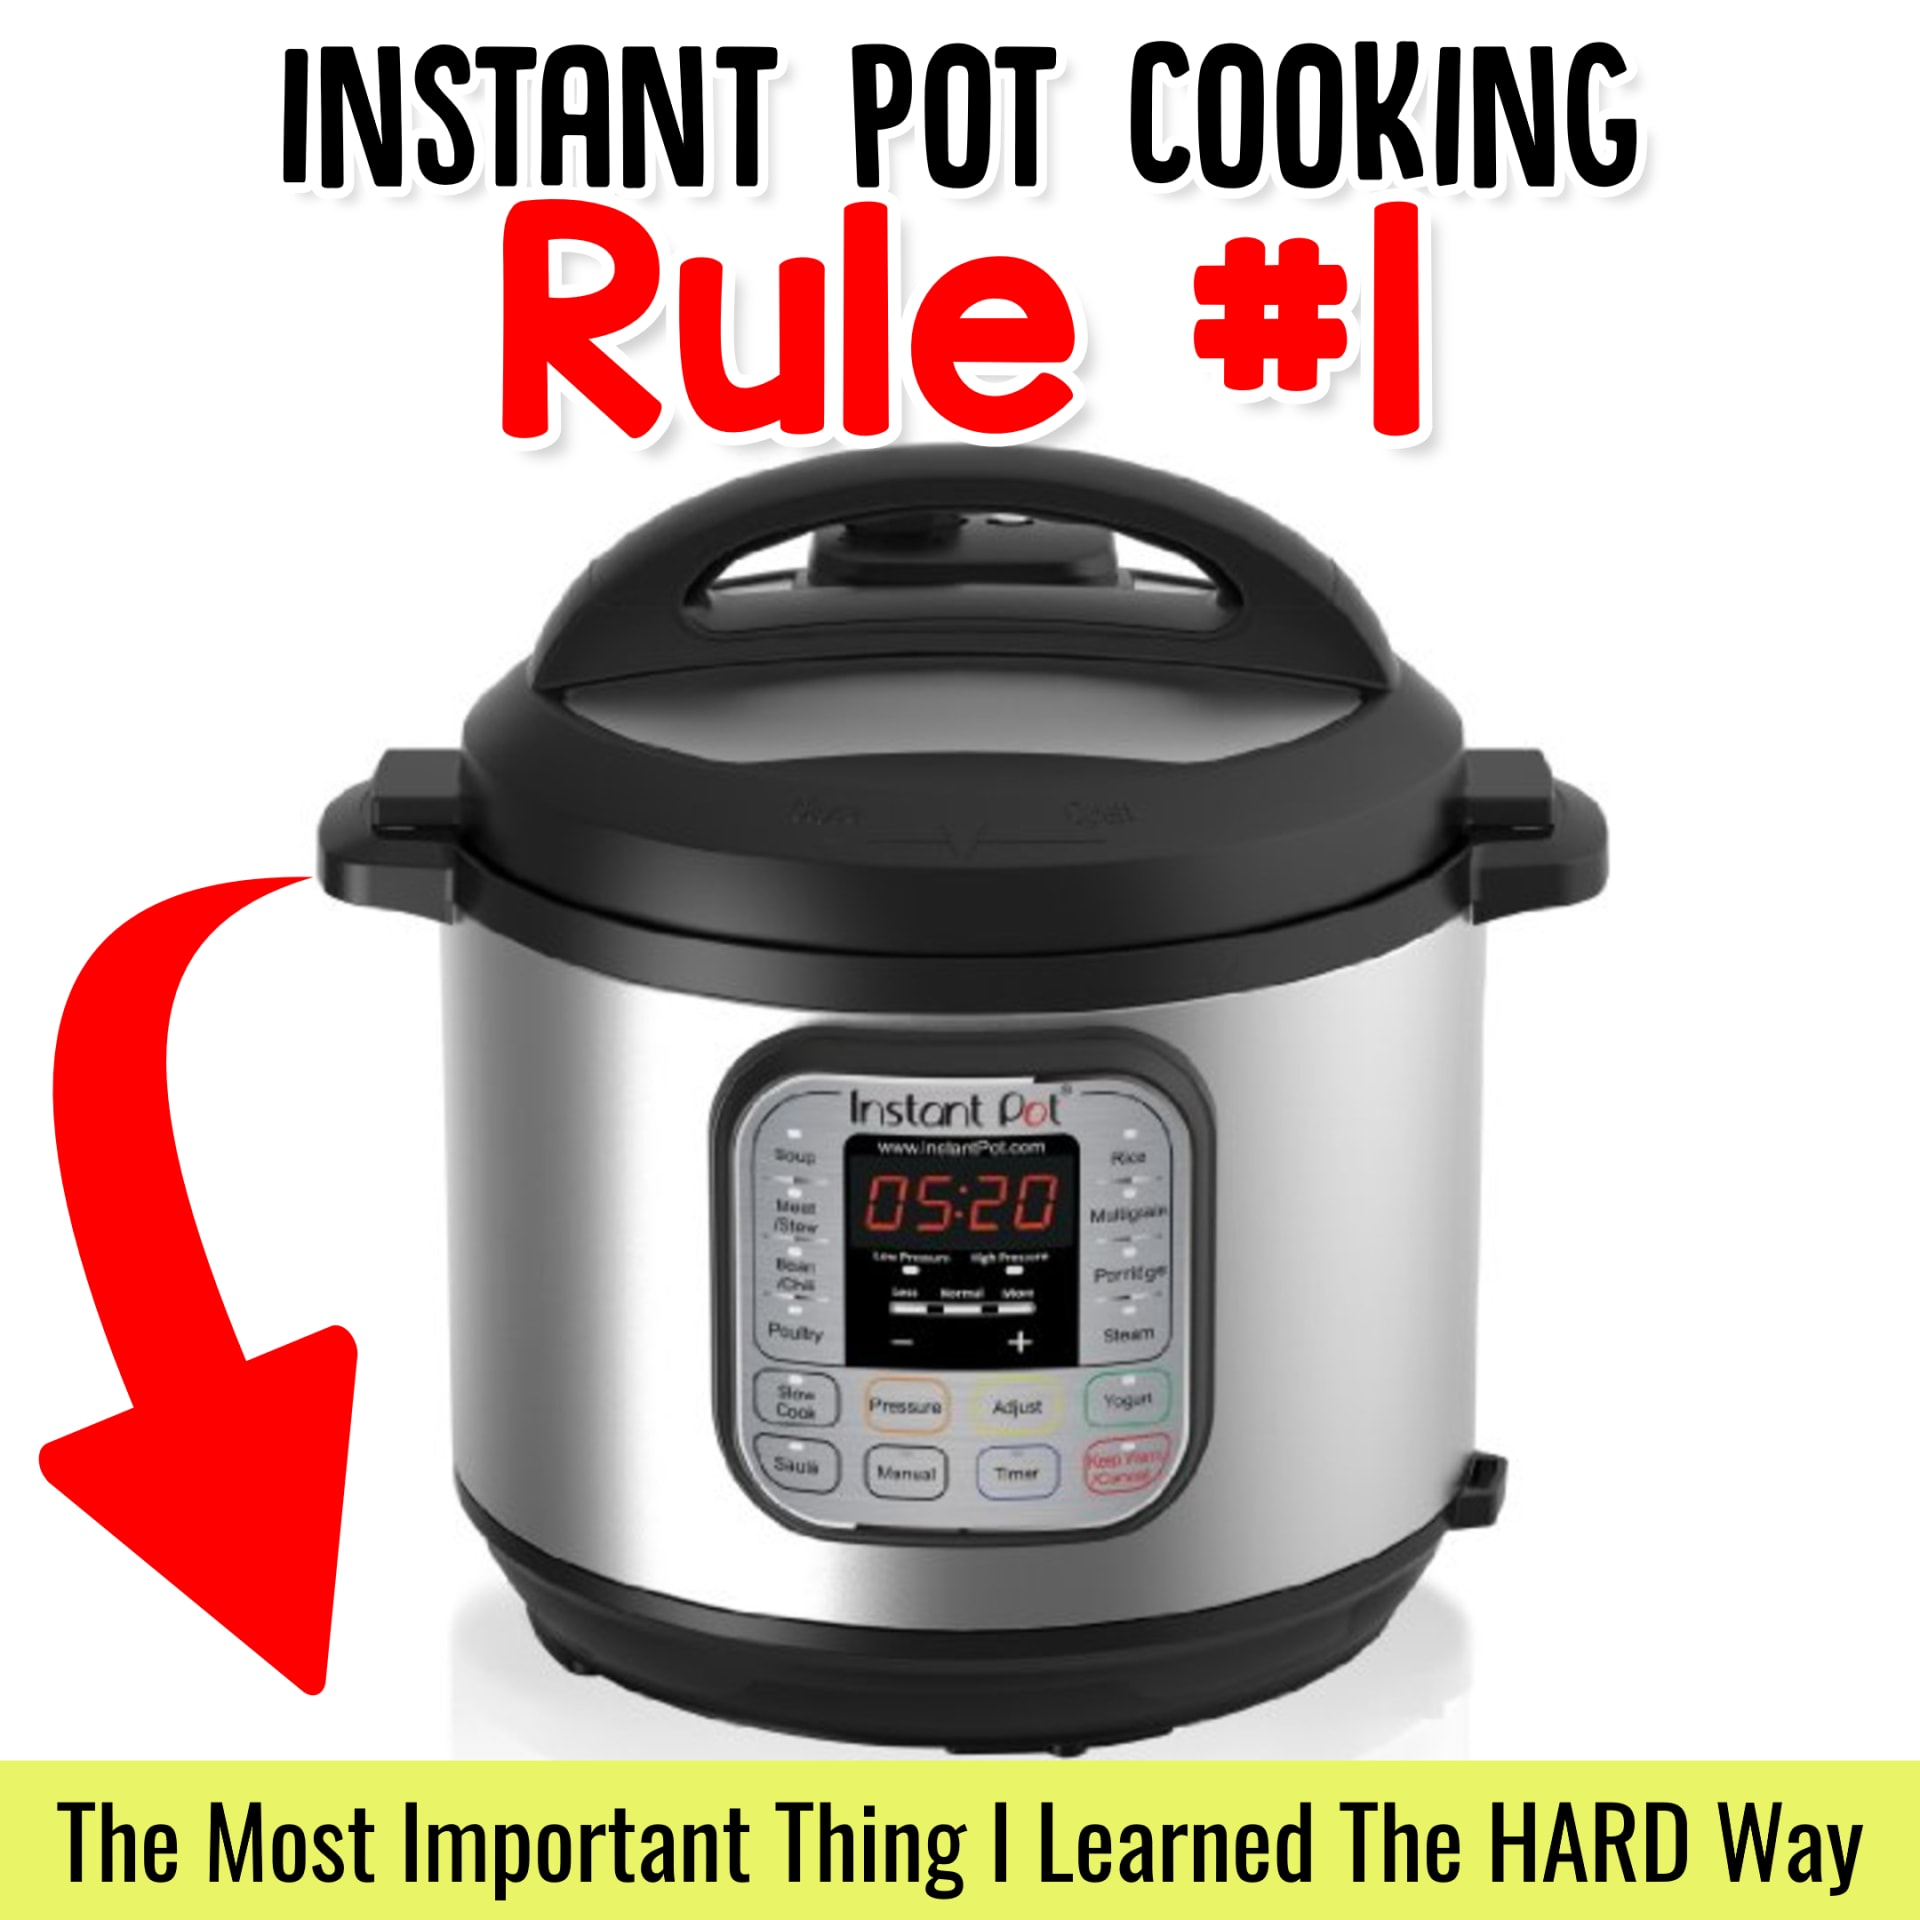 Instant Pot Tips and Tricks for Beginners - Instant Pot Pressure Cooker Cooking Tips, Tricks and Cooking Hacks you NEED to know